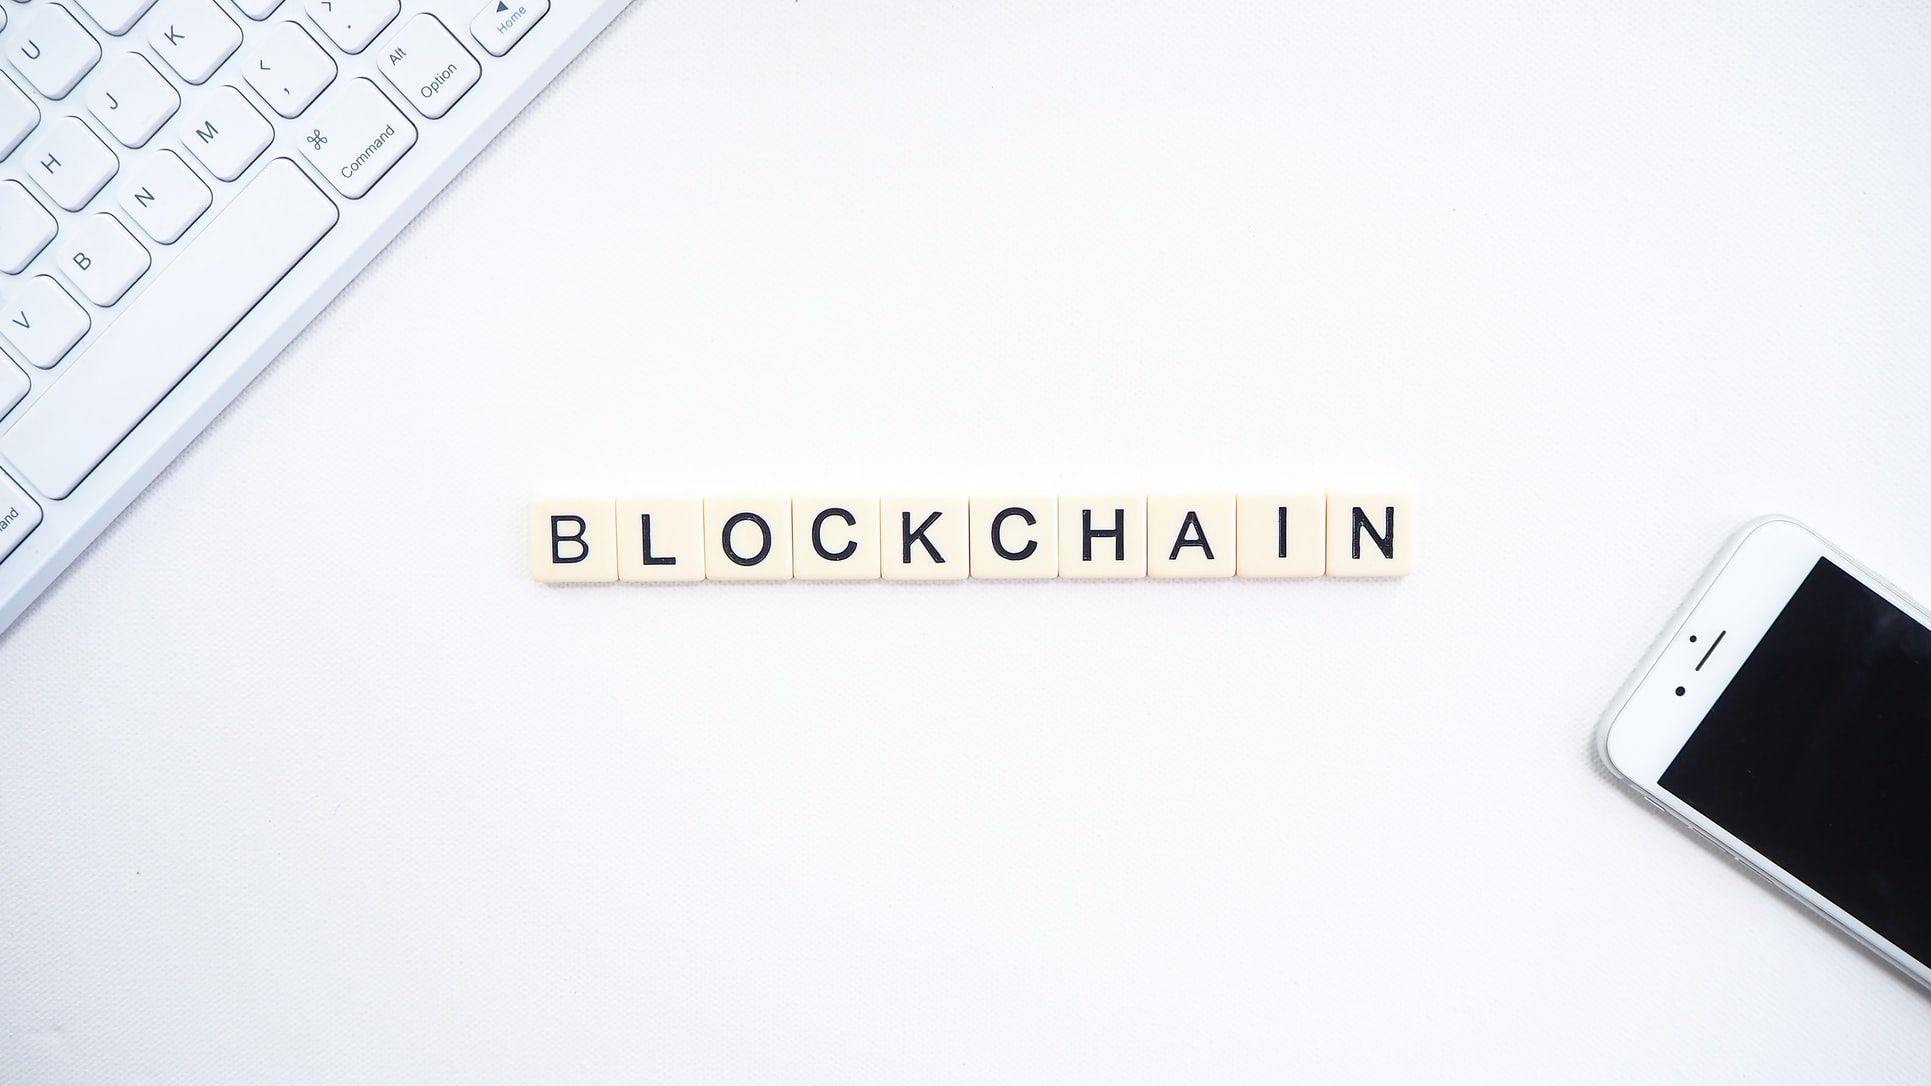 Everything you need to know about blockchain